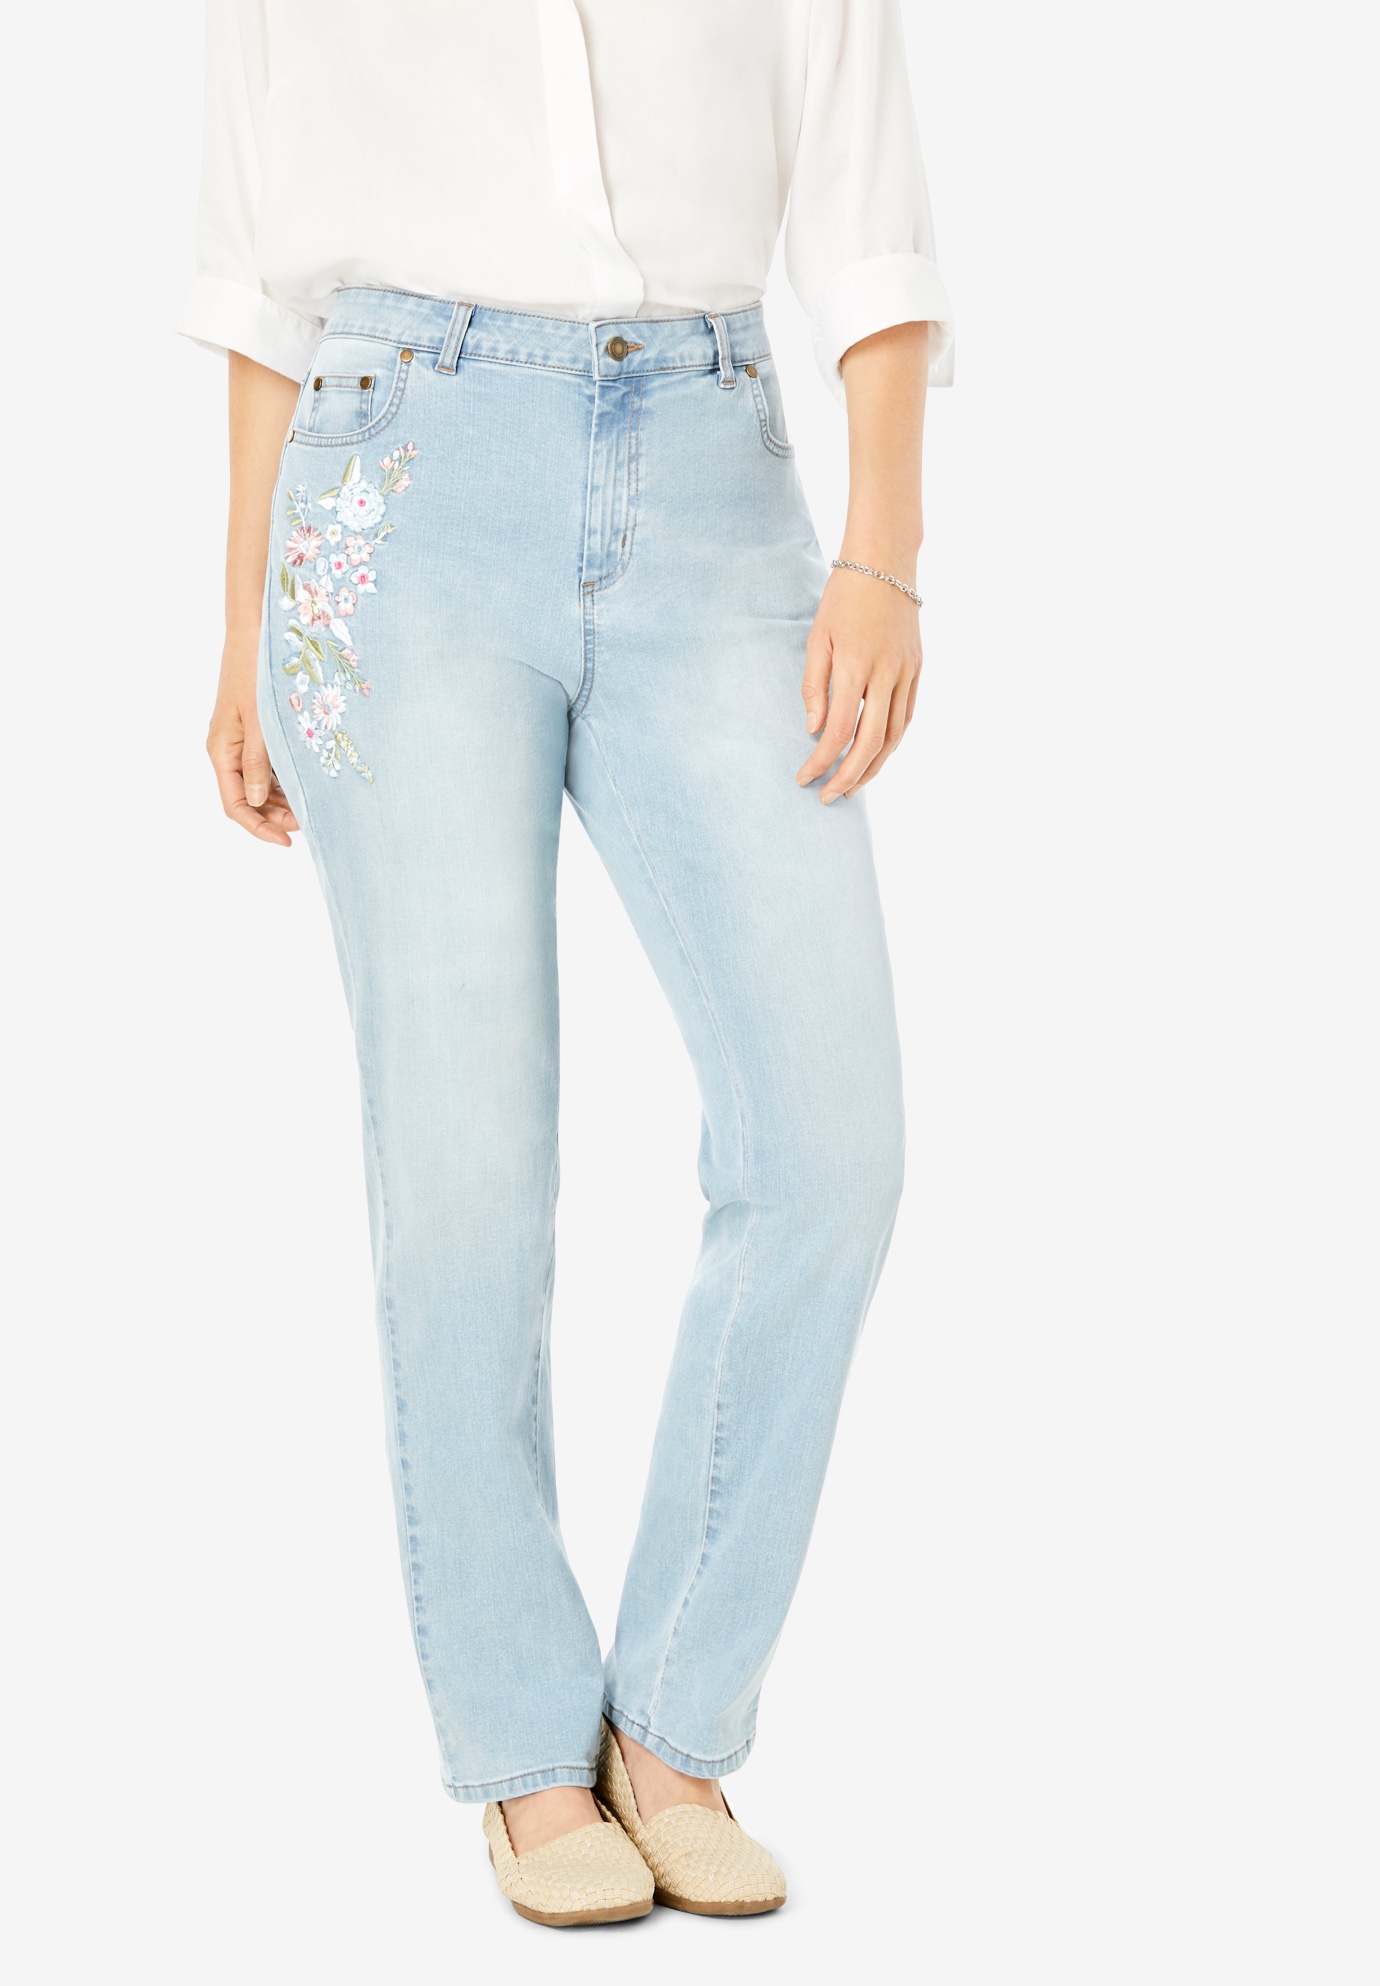 Straight Leg Stretch Jean, LIGHT WASH SANDED FLORAL EMBROIDERY